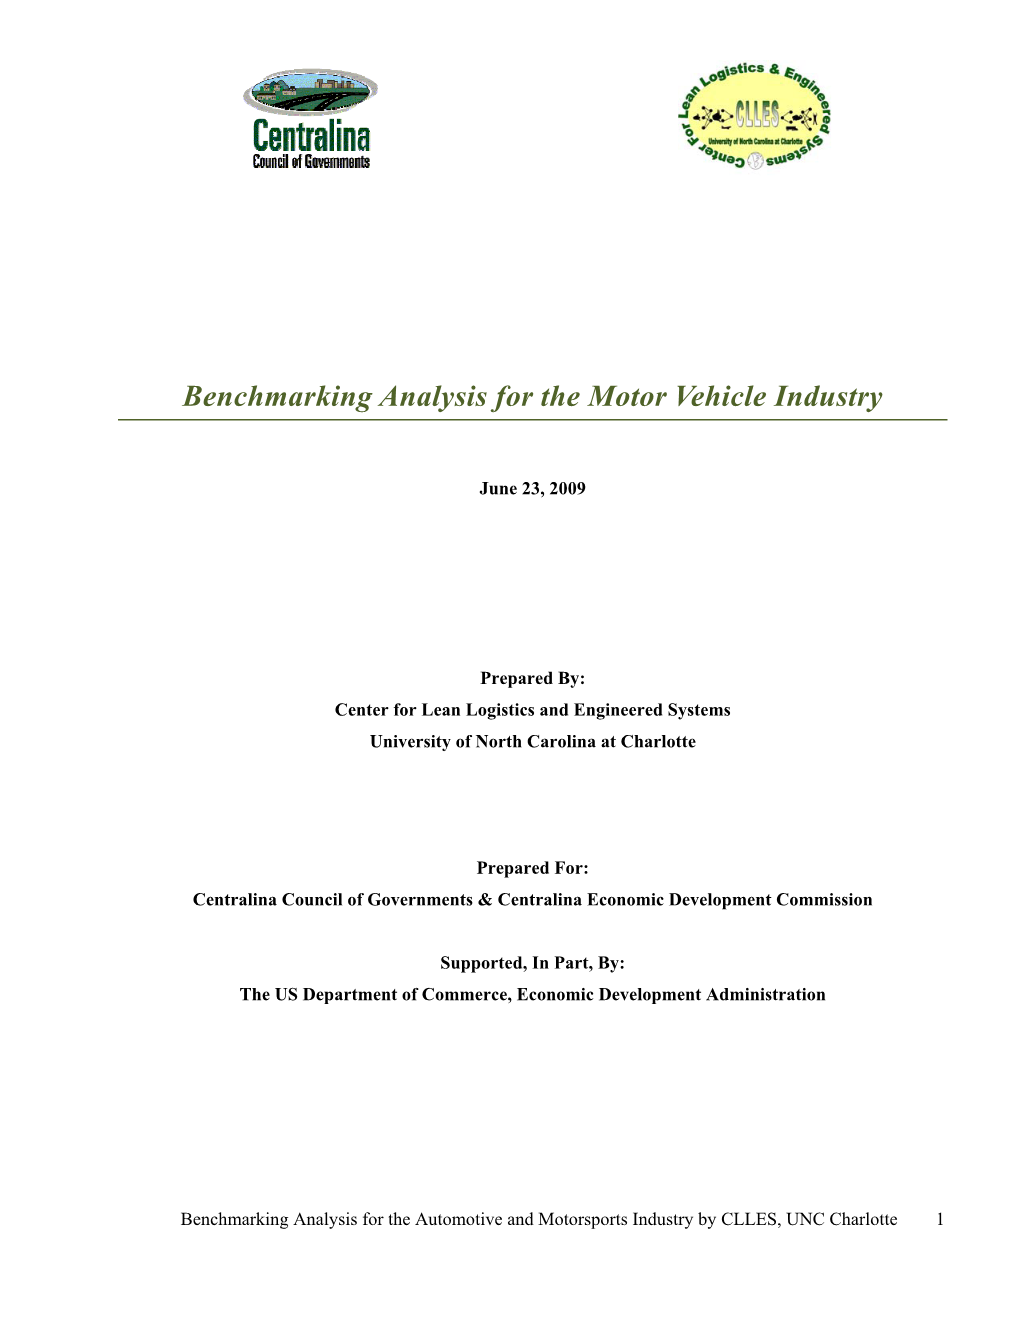 Benchmarking Analysis for the Motor Vehicle Industry